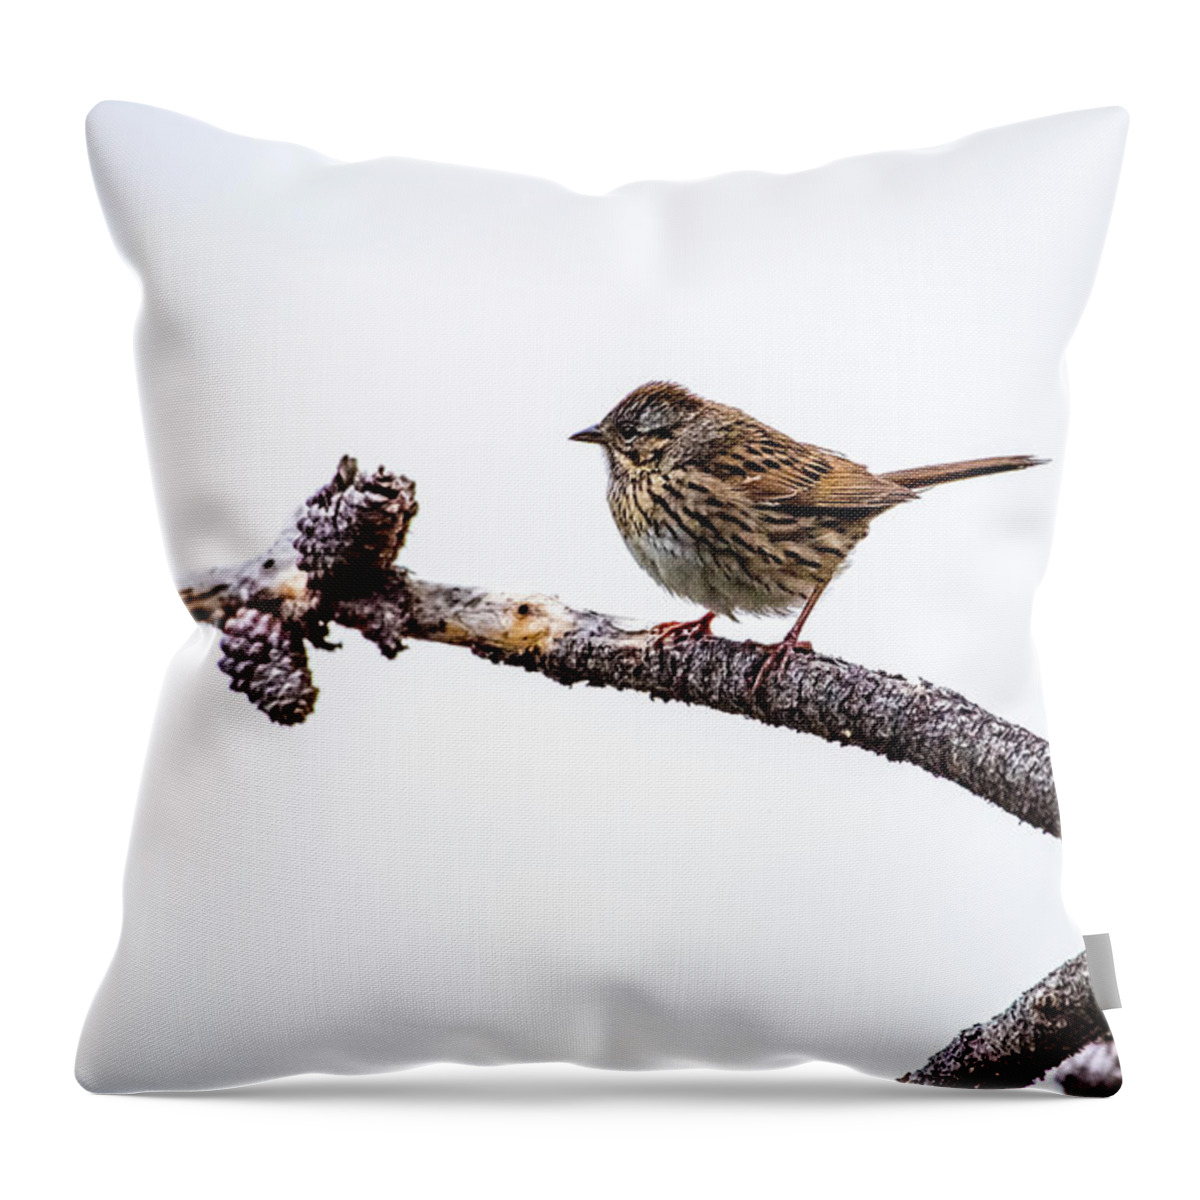 Wildlife Throw Pillow featuring the photograph Lincoln's Sparrow by David Morefield